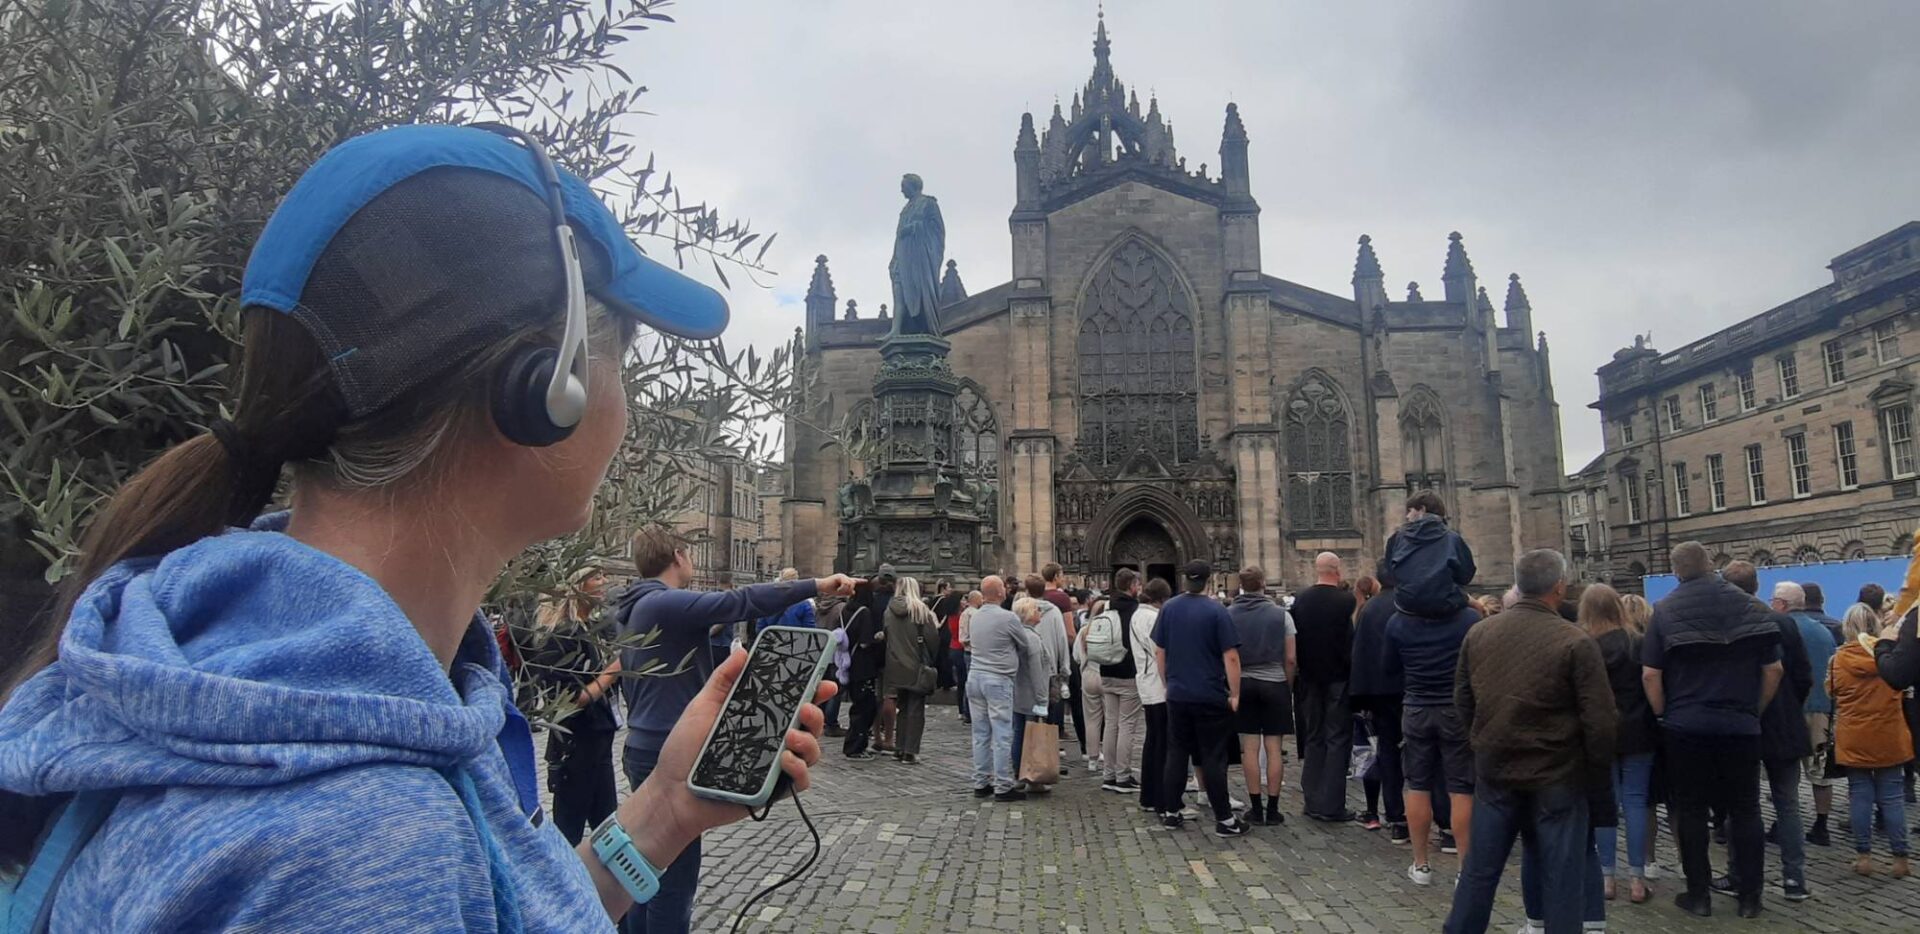 Woman listening to audio tour standing in front of St Giles' Cathedral